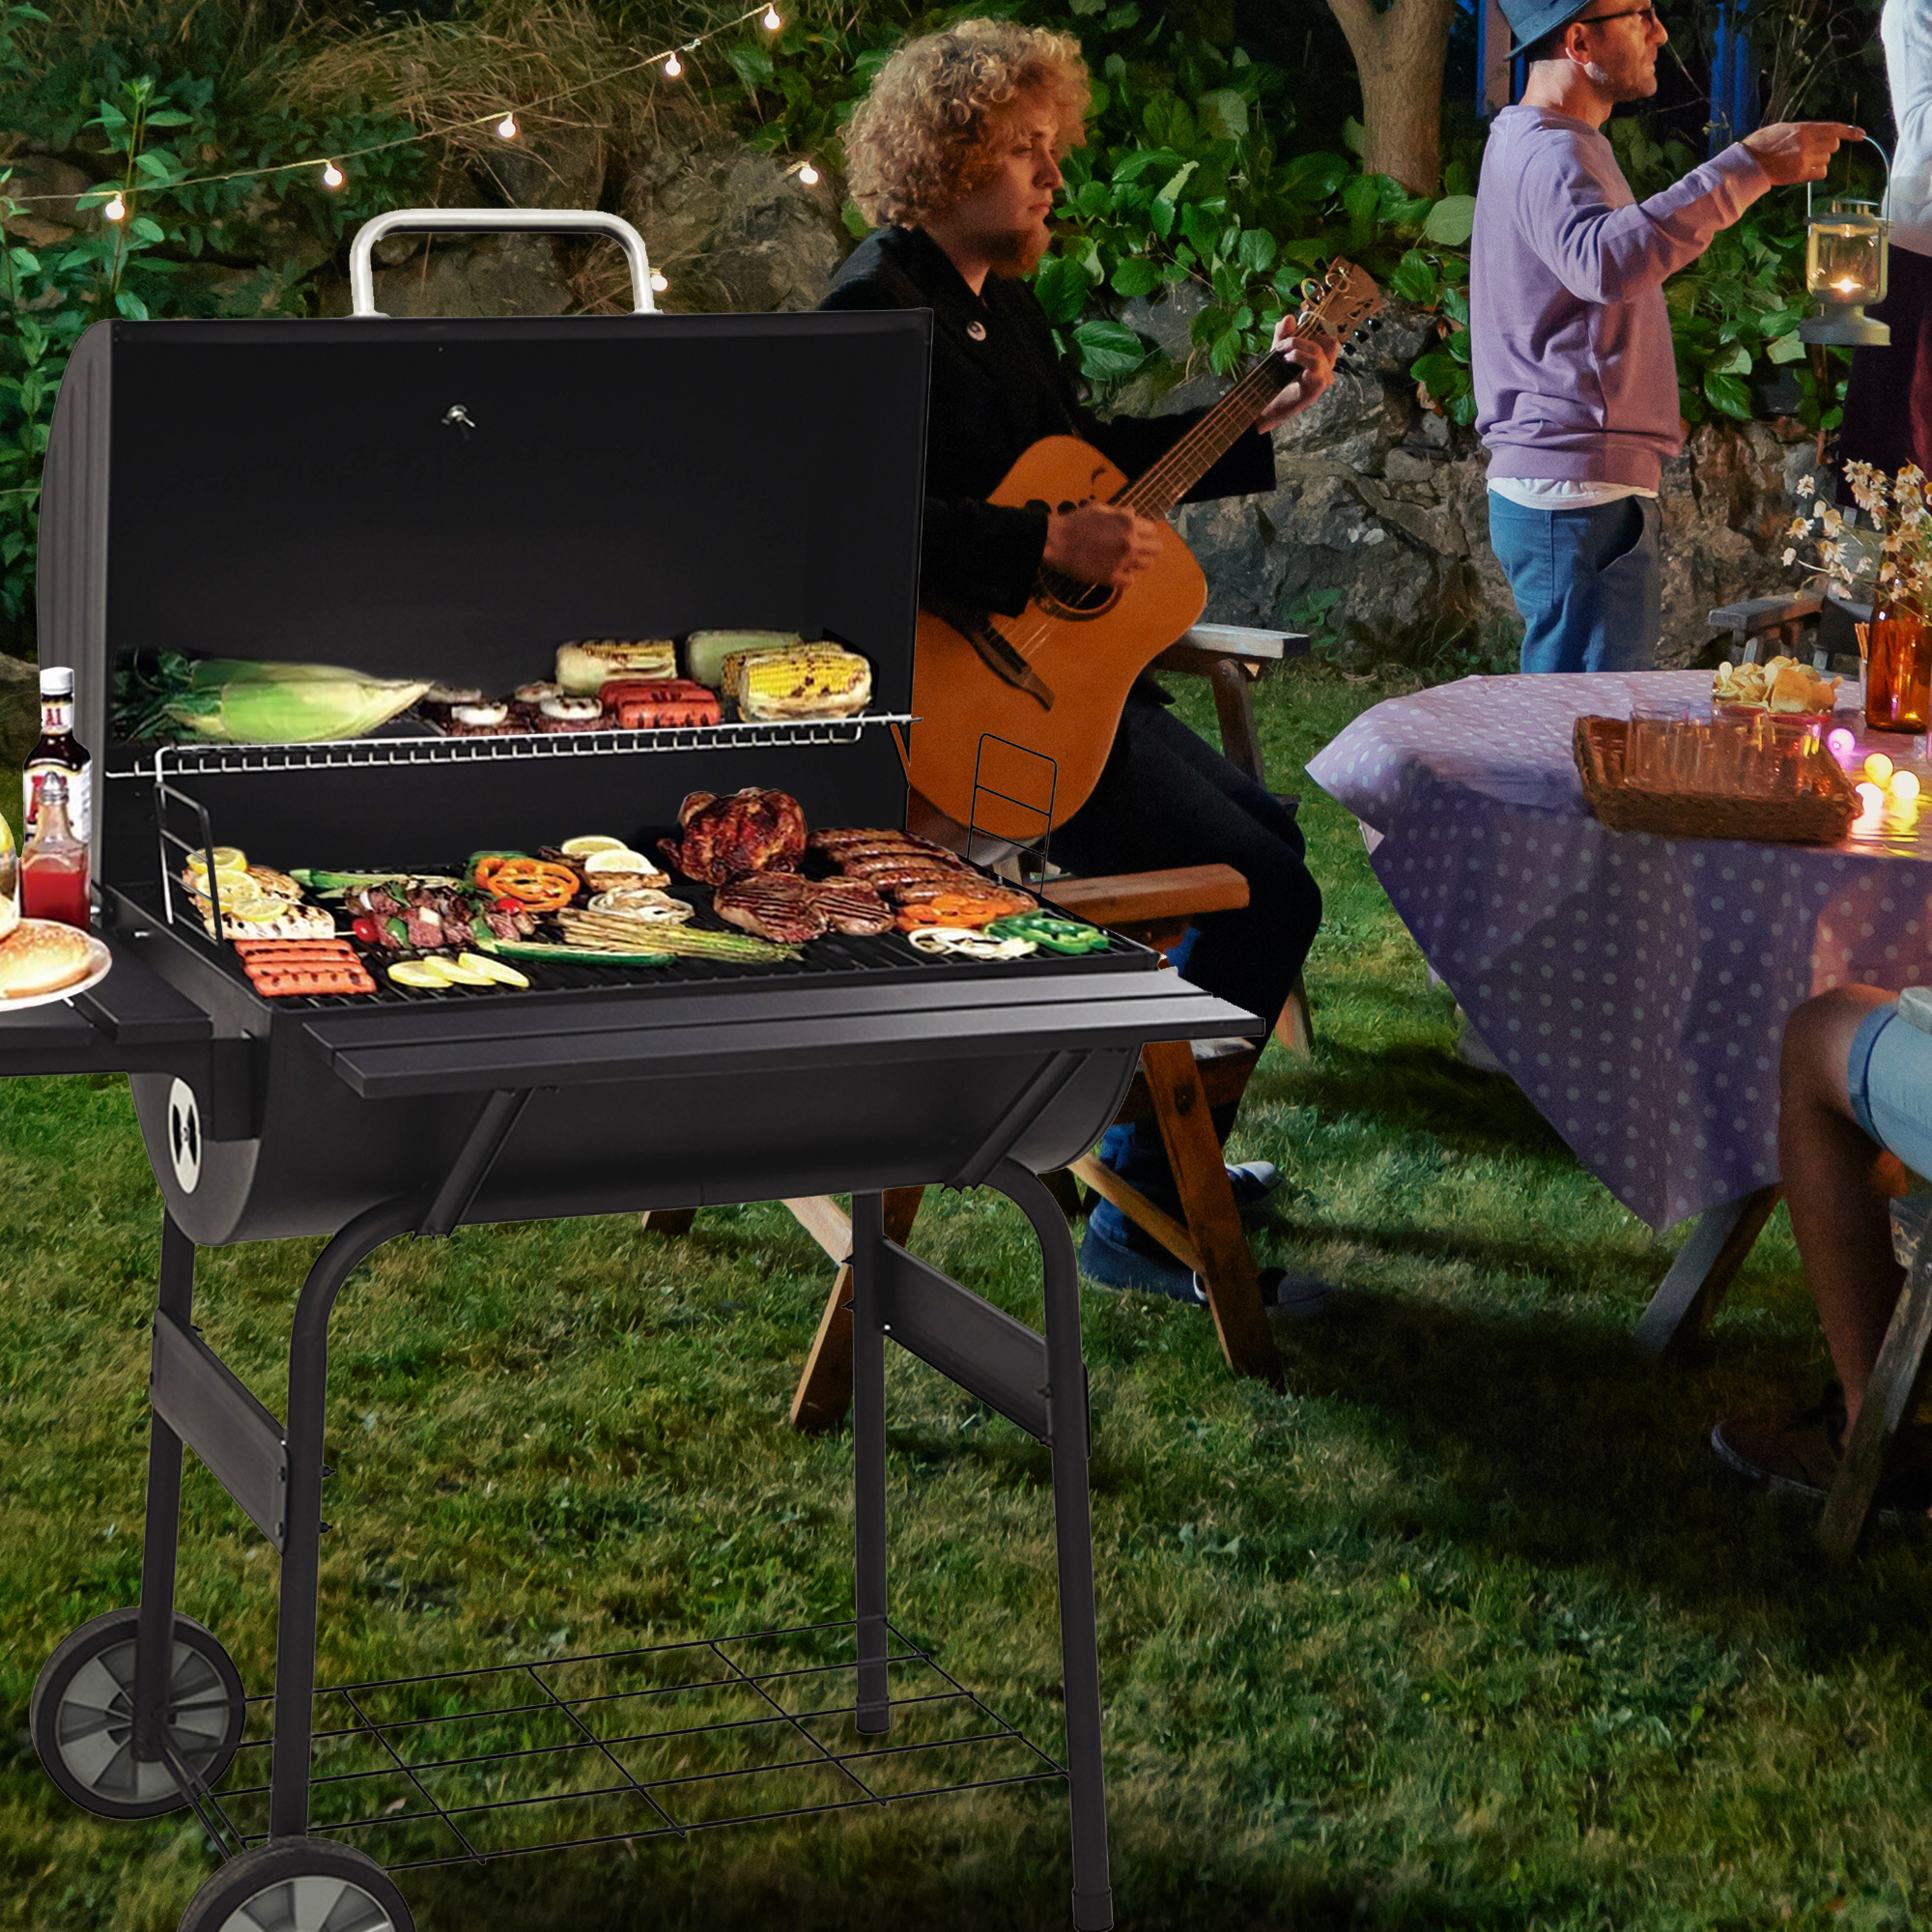 Patio Outdoor Charcoal Grill for Patio, 30'' Portable BBQ Charcoal Grill with Metal Shelf, BBQ Charcoal Grill w/Temperature Gauge and Metal Grate, Cooking Grate for Steak Chicken, SS1062 - image 1 of 8